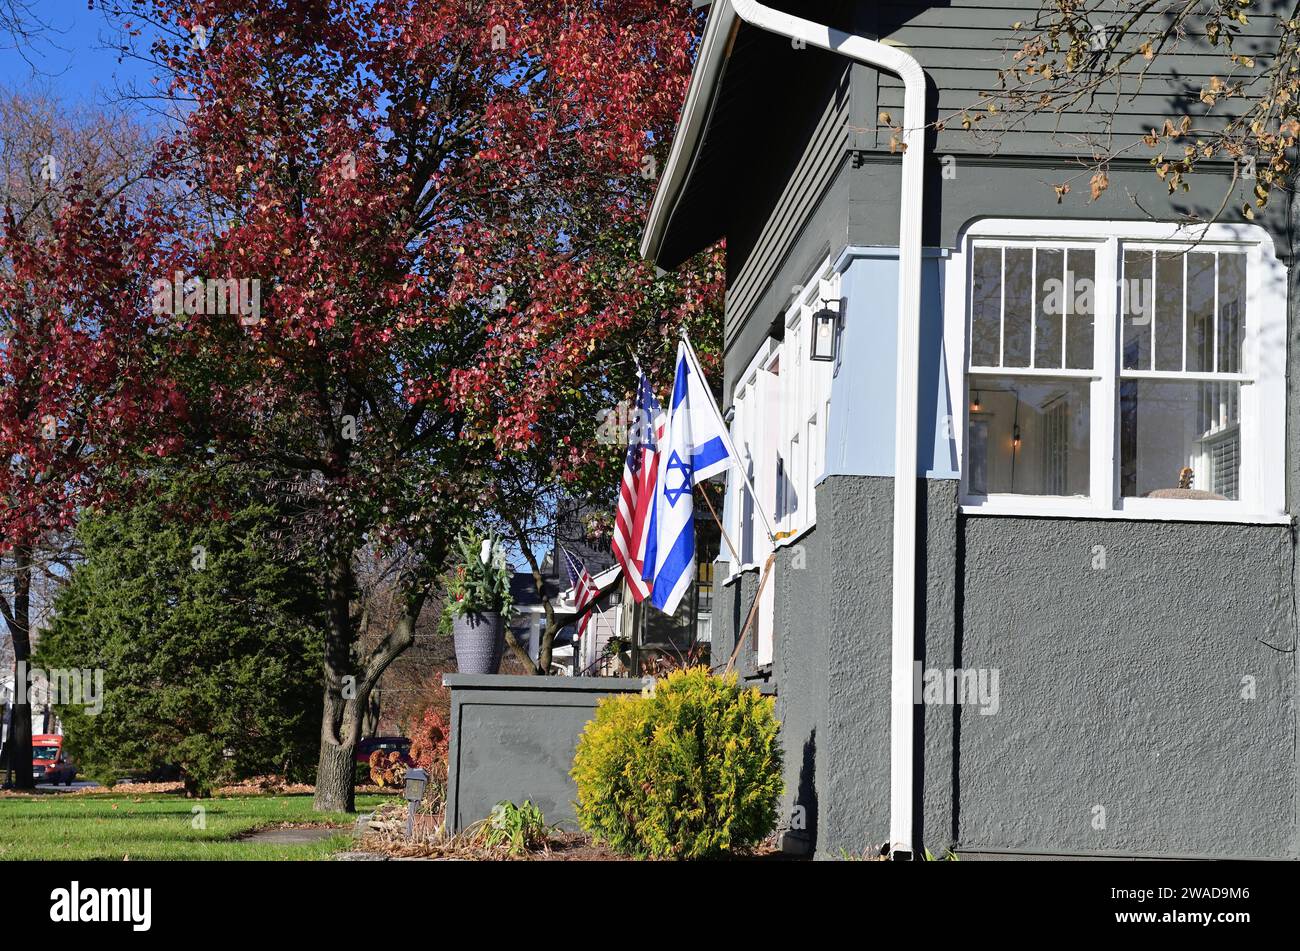 Wheaton, Illinois, USA. A suburban Chicago home displaying both an American Flag and the Flag of Israel on its exterior. Stock Photo